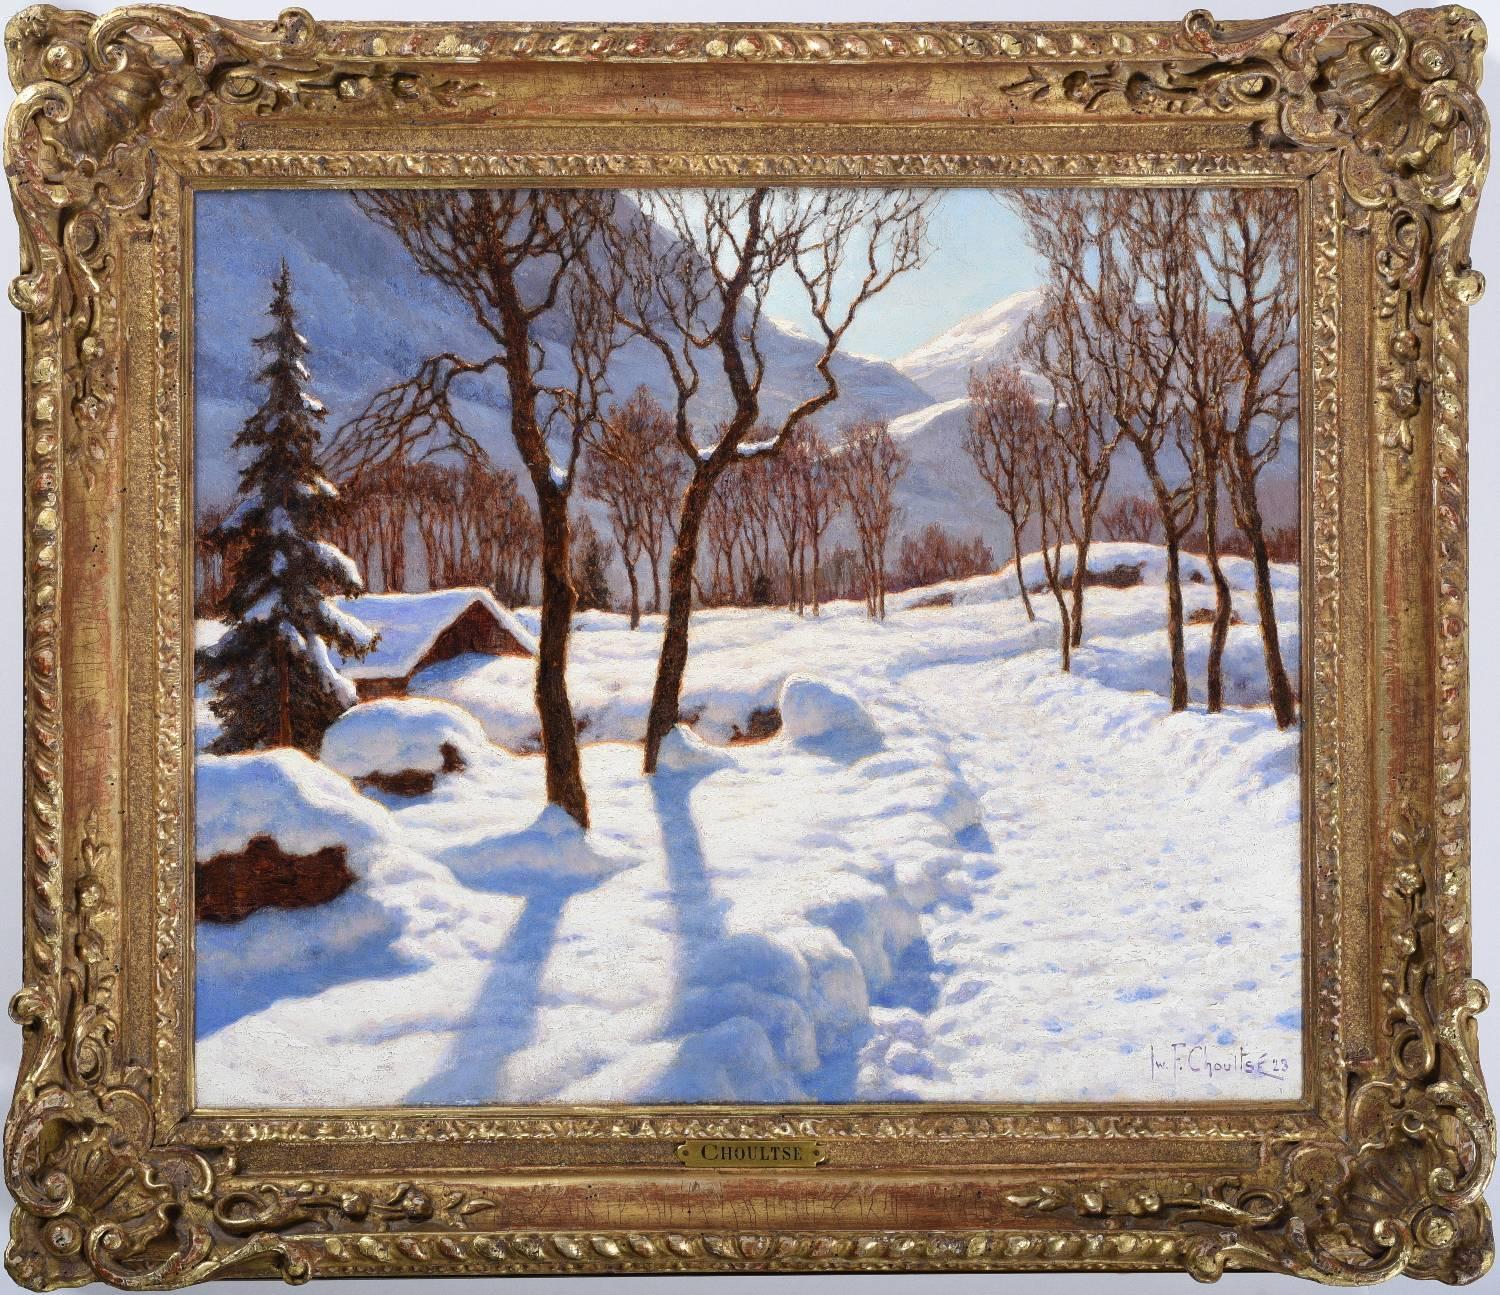 Scene d'Hiver dans les Alpes - Painting by Ivan Fedorovich Choultse